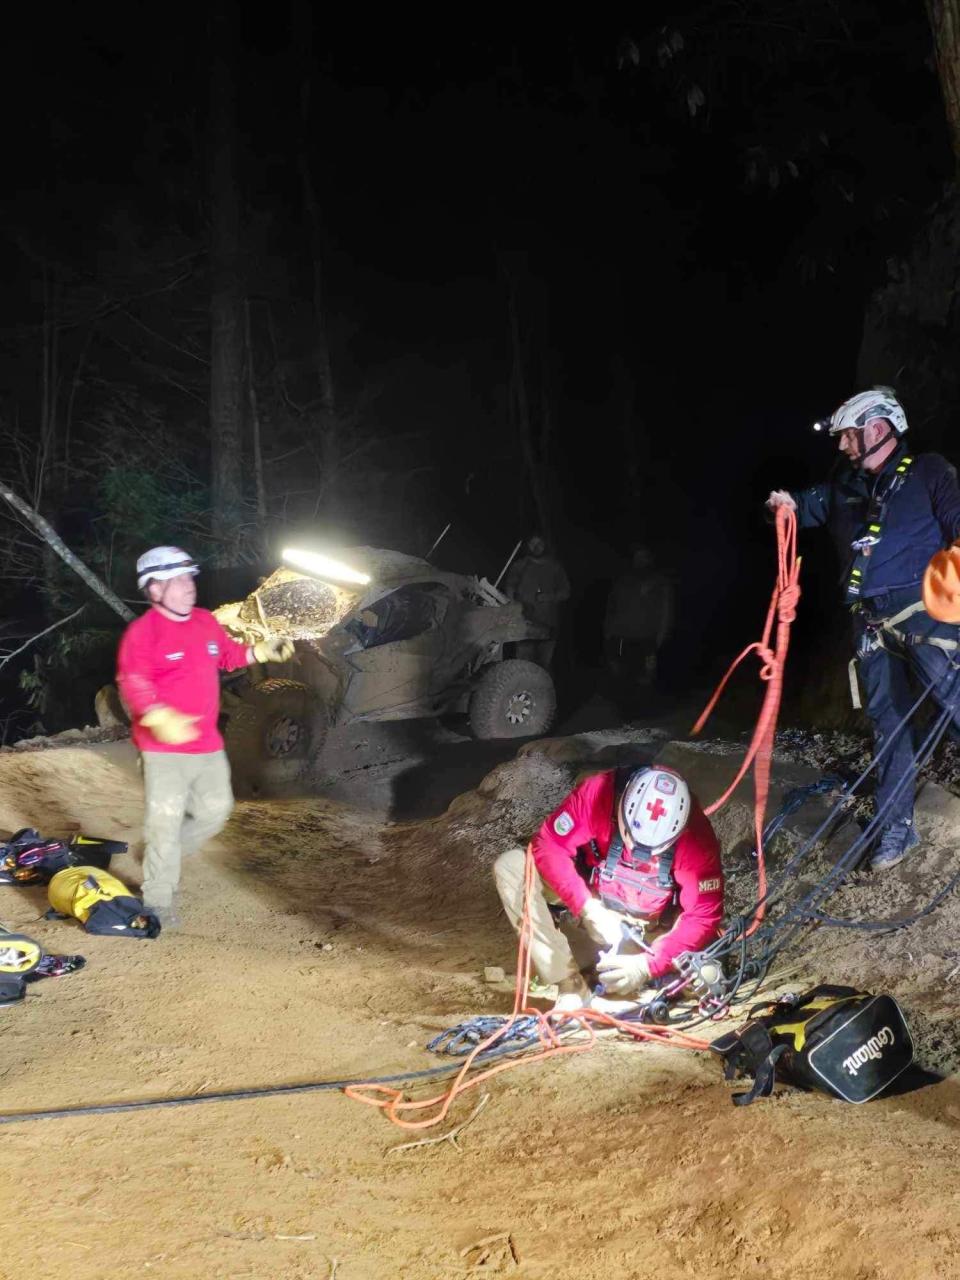 Emergency crews responded Sunday to reports of a UTV accident at Hollerwood Off-Road Park in Powell County, Kentucky. A man died at the scene, but they were able to use a rope pulley system to rescue a woman trapped in the UTV.